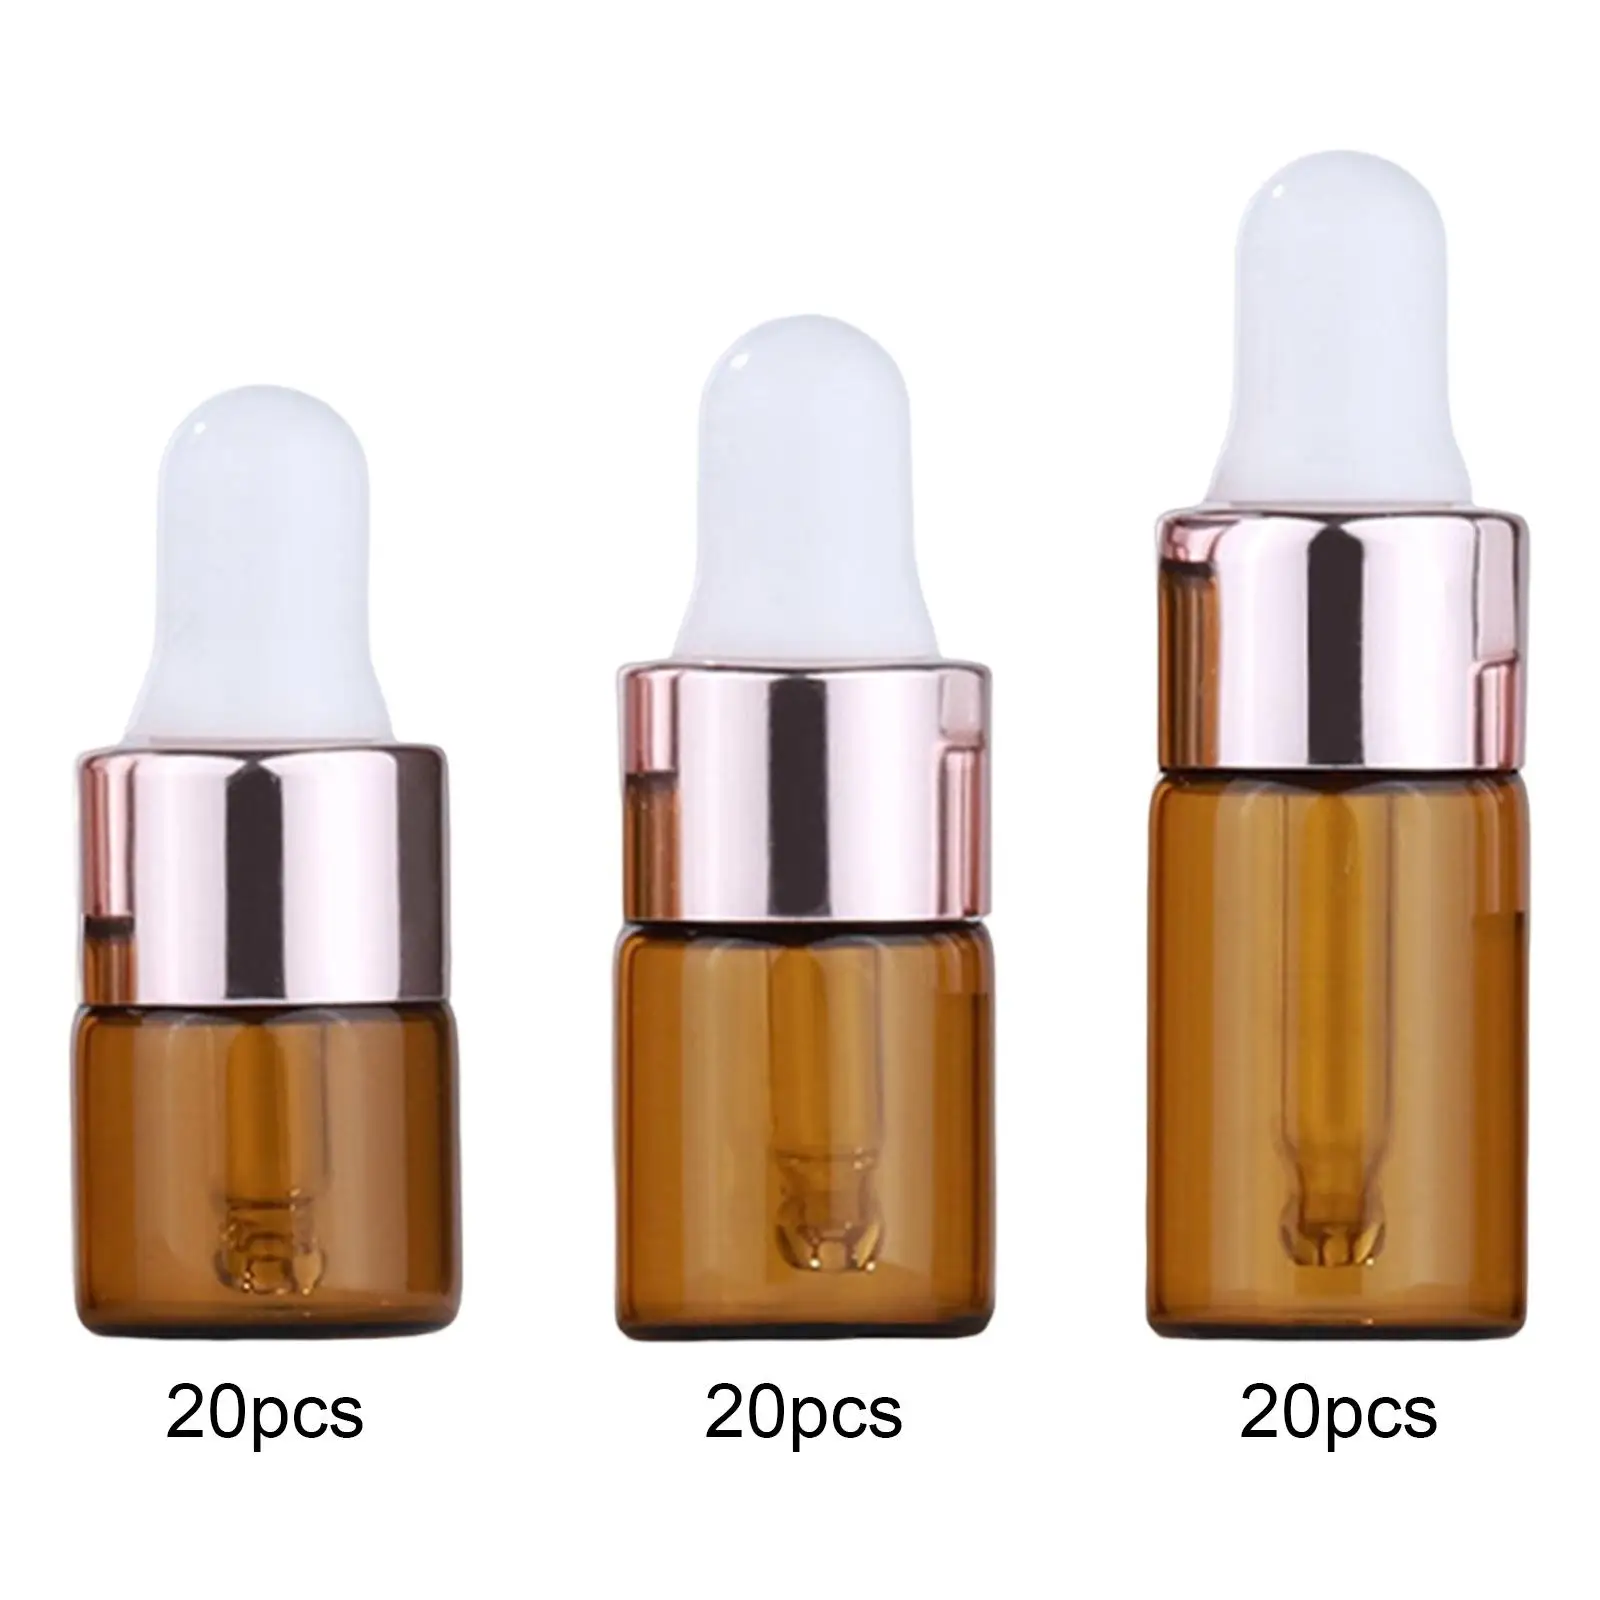 20Pcs Mini Empty Glass Dropper Bottles Travel Bottles with Eye Droppers for Cosmetic Essential Oil Perfume Sample